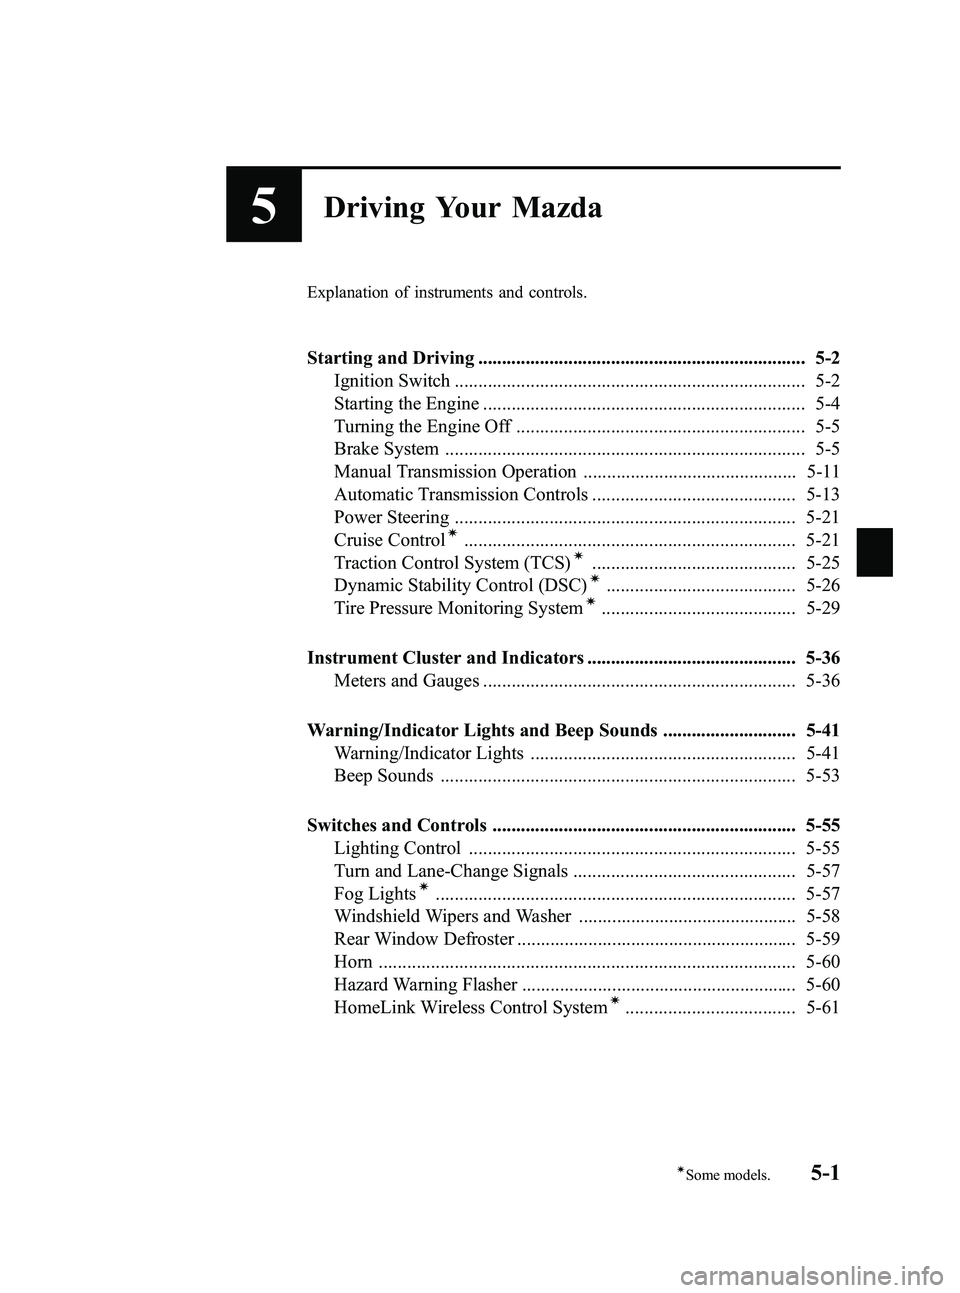 MAZDA MODEL MX-5 MIATA PRHT 2013  Owners Manual Black plate (145,1)
5Driving Your Mazda
Explanation of instruments and controls.
Starting and Driving ..................................................................... 5-2Ignition Switch .........